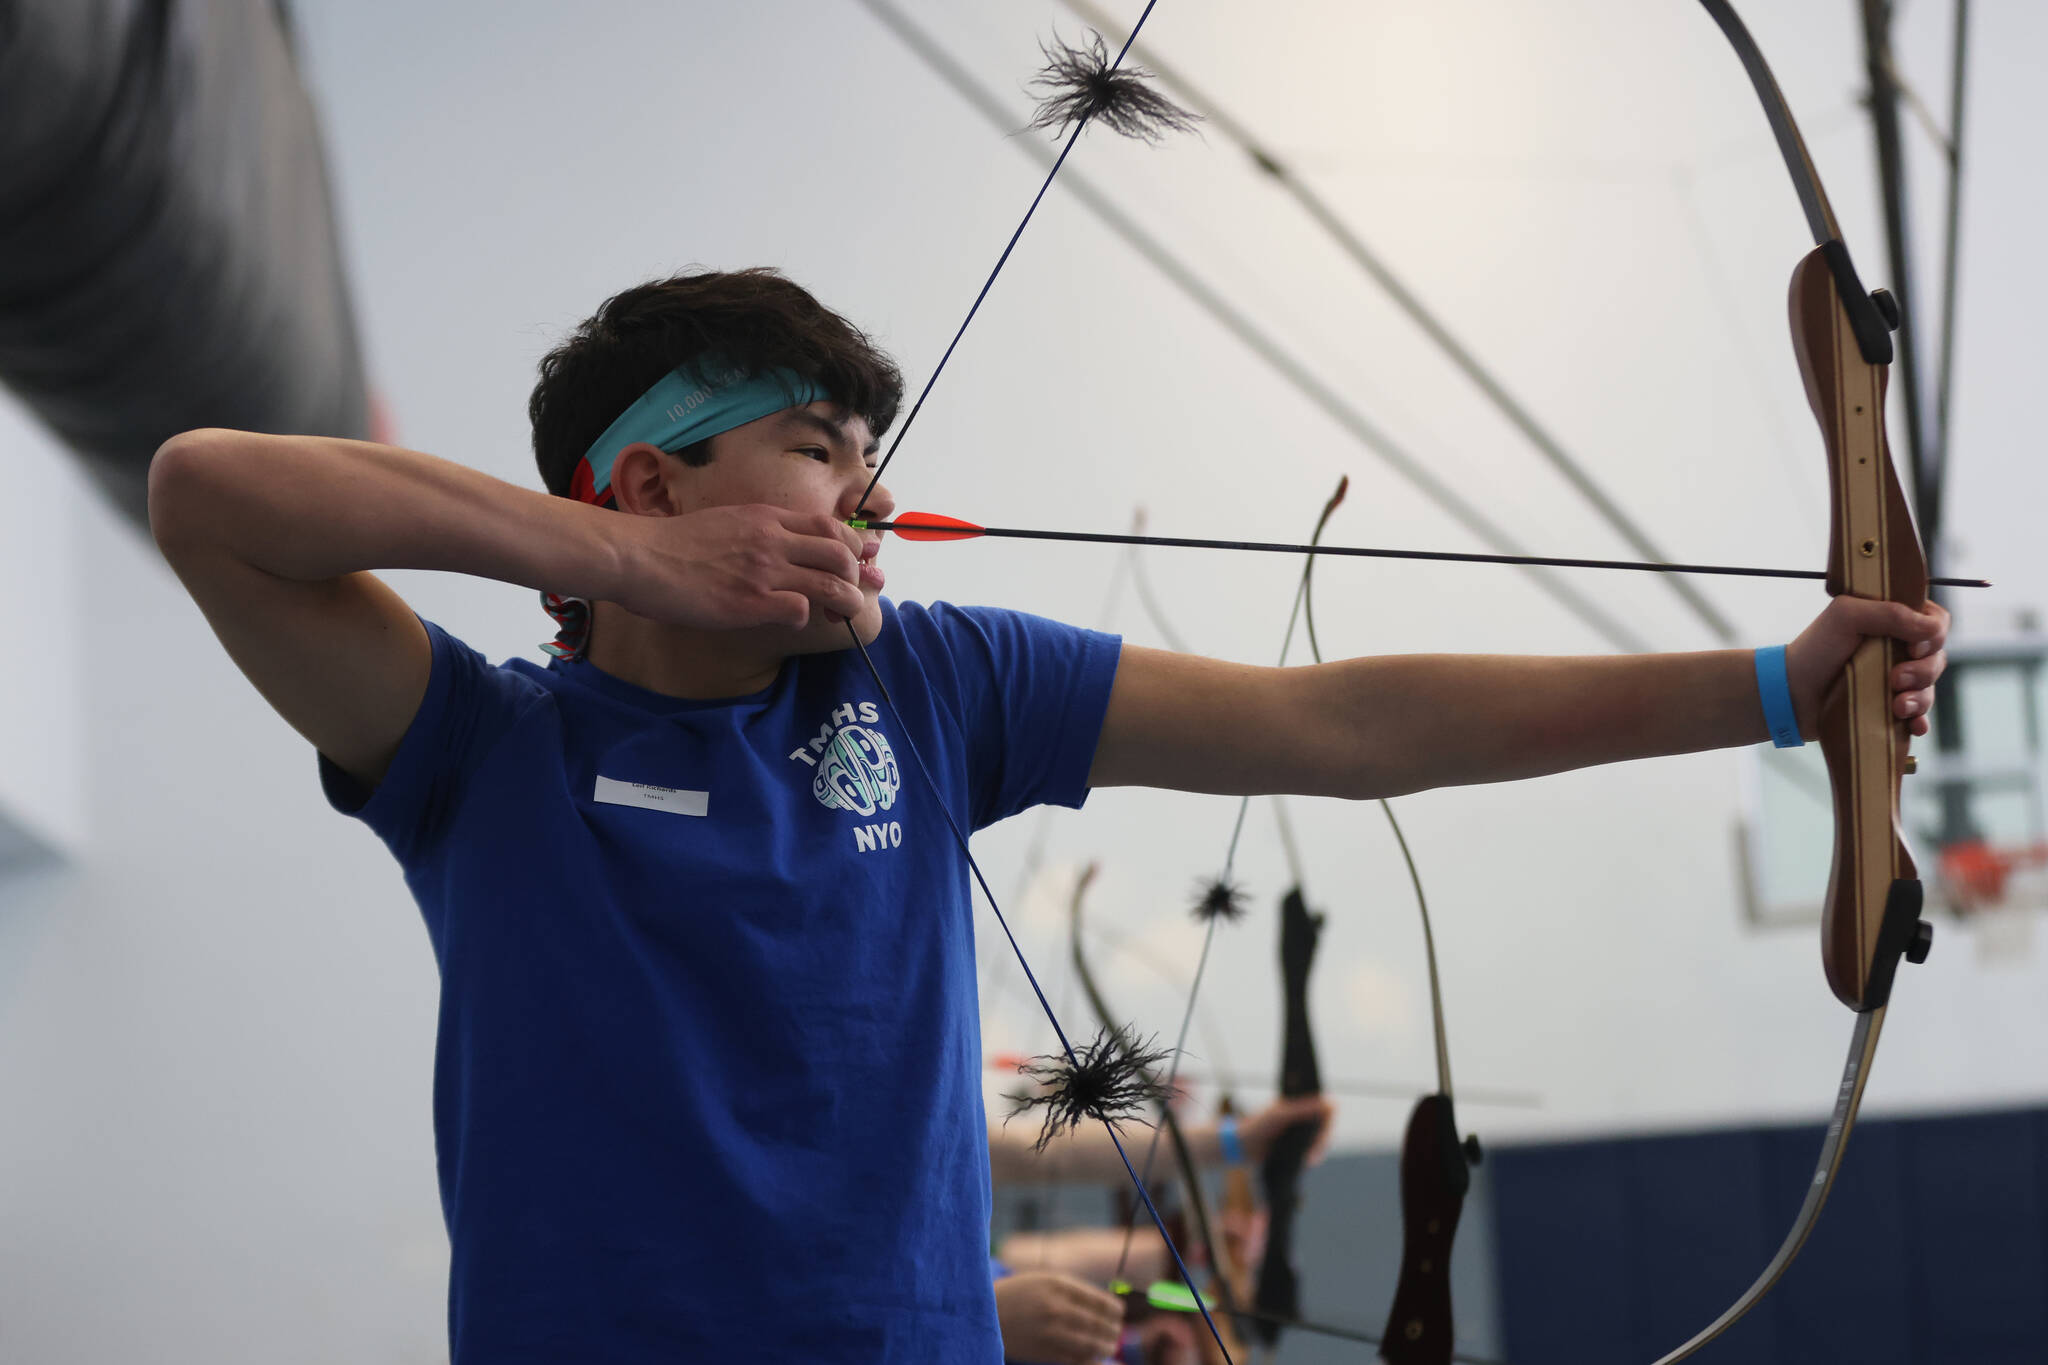 Lee Richards, a Thunder Mountain High School sophomore, gets ready to let an arrow fly during this year’s Traditional Games held Saturday and Sunday at the high school in Juneau. This year’s games were the first to feature archery. (Ben Hohenstatt / Juneau Empire)